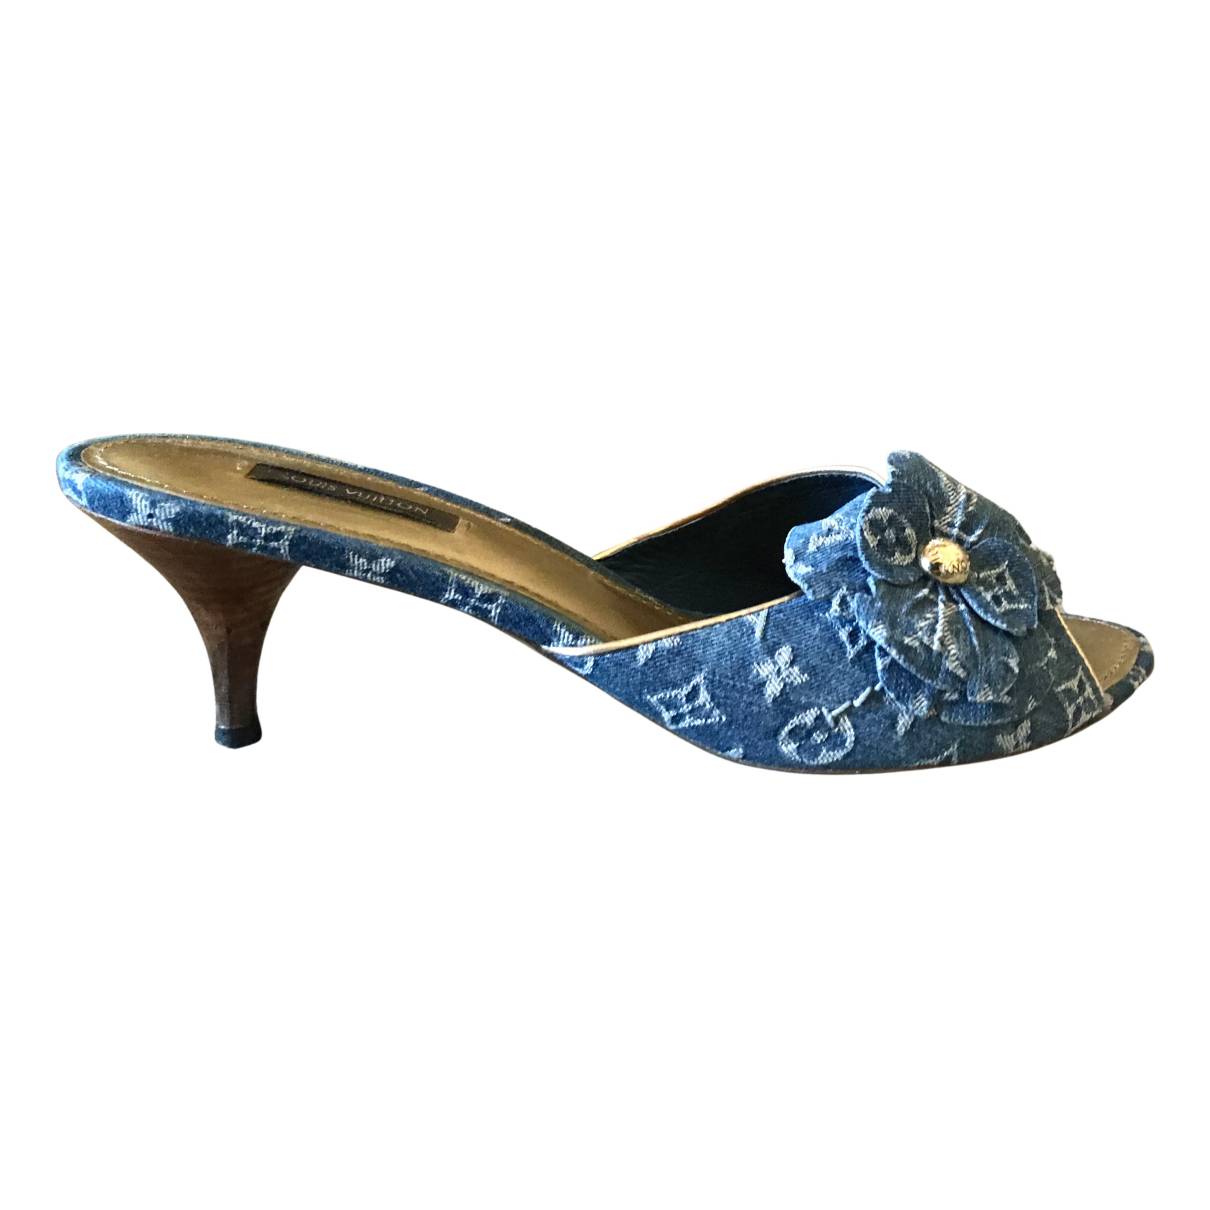 Louis Vuitton - Authenticated Revival Sandal - Cloth Blue for Women, Very Good Condition